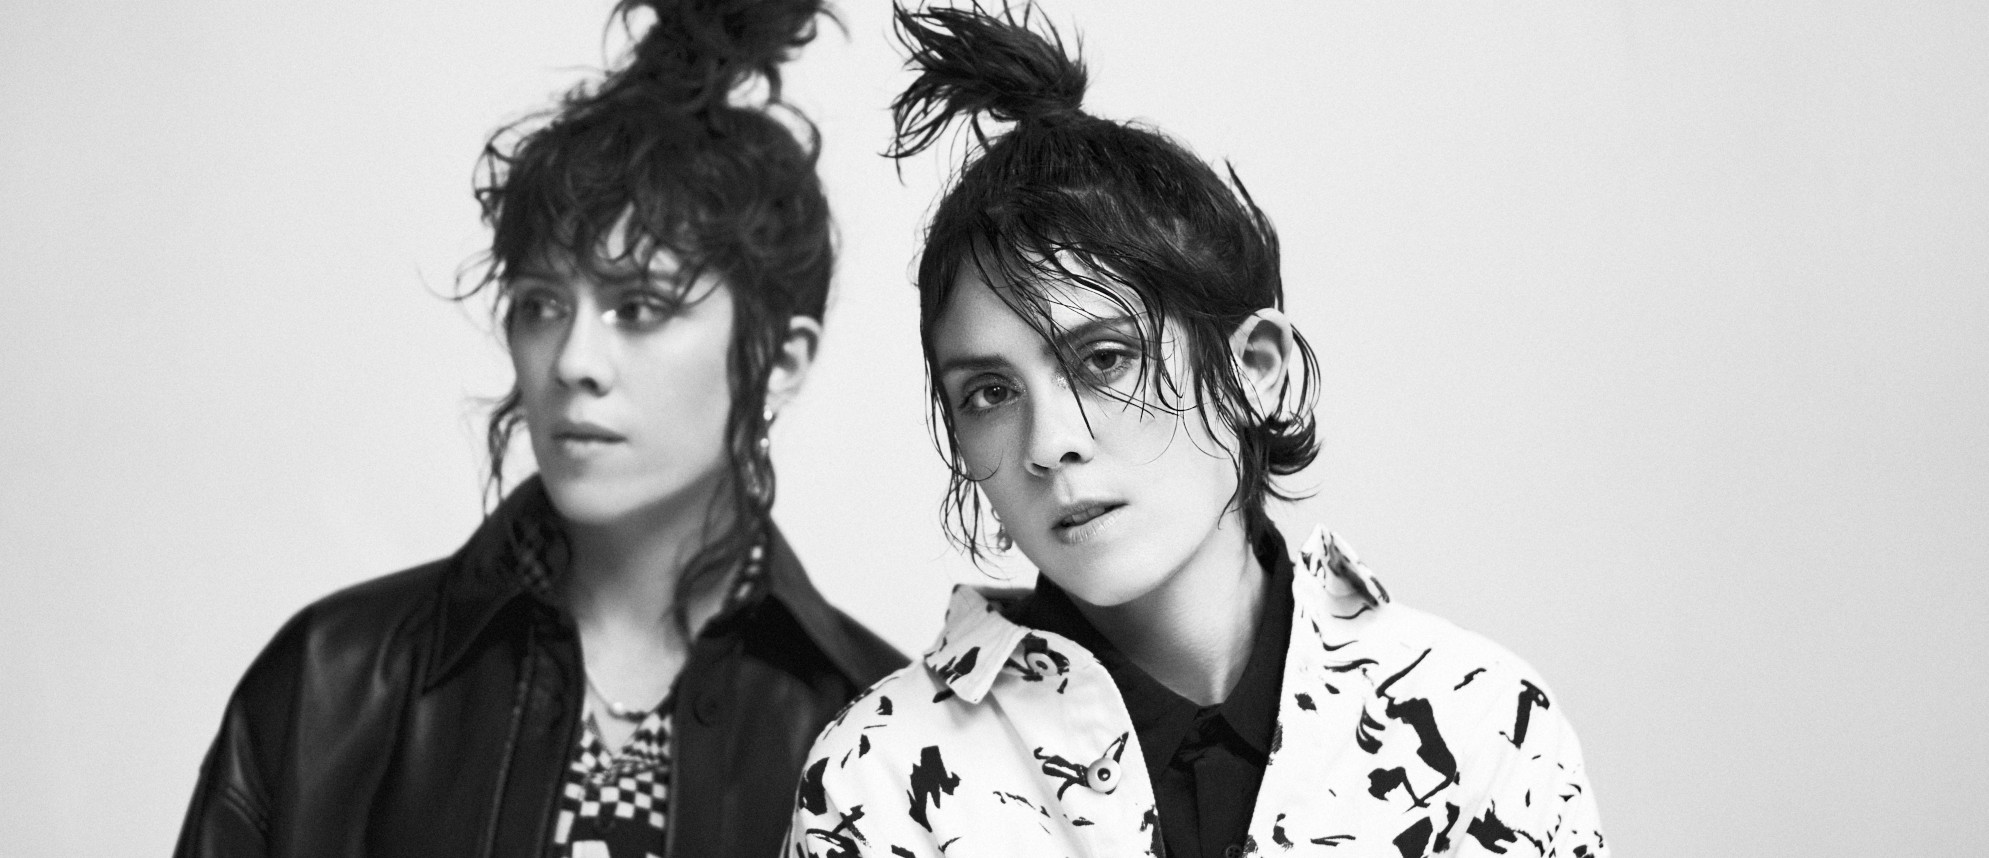 Tegan and Sara Announce New Album ‘Crybaby,’ Share New Tour Dates and Single “Yellow”